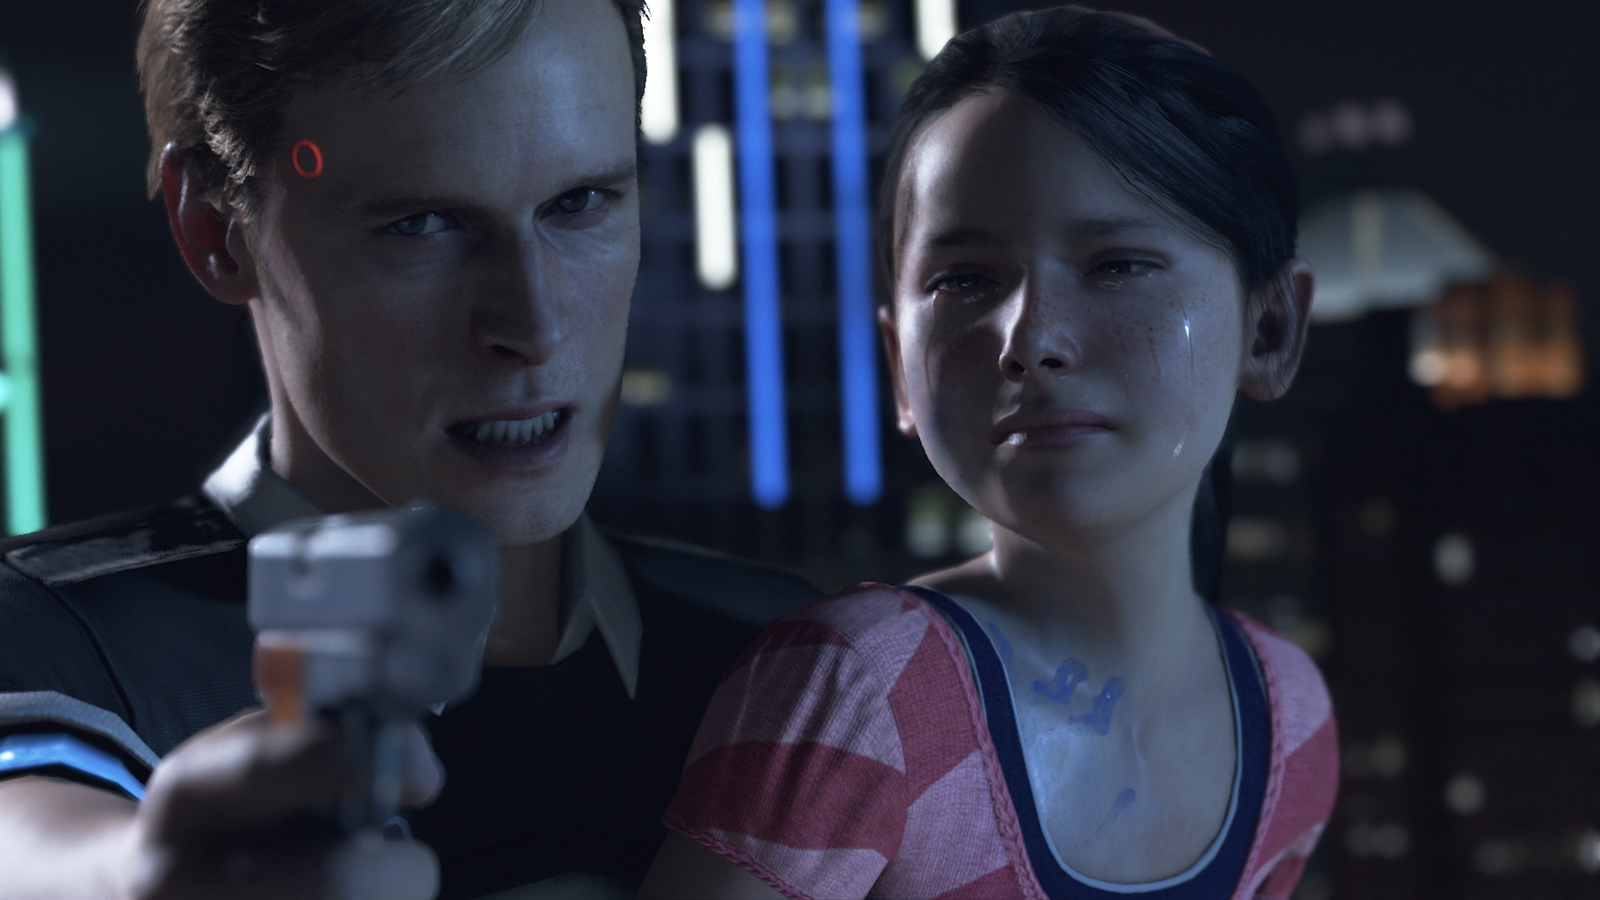 New Detroit Become Human trailers introduce us to the game's